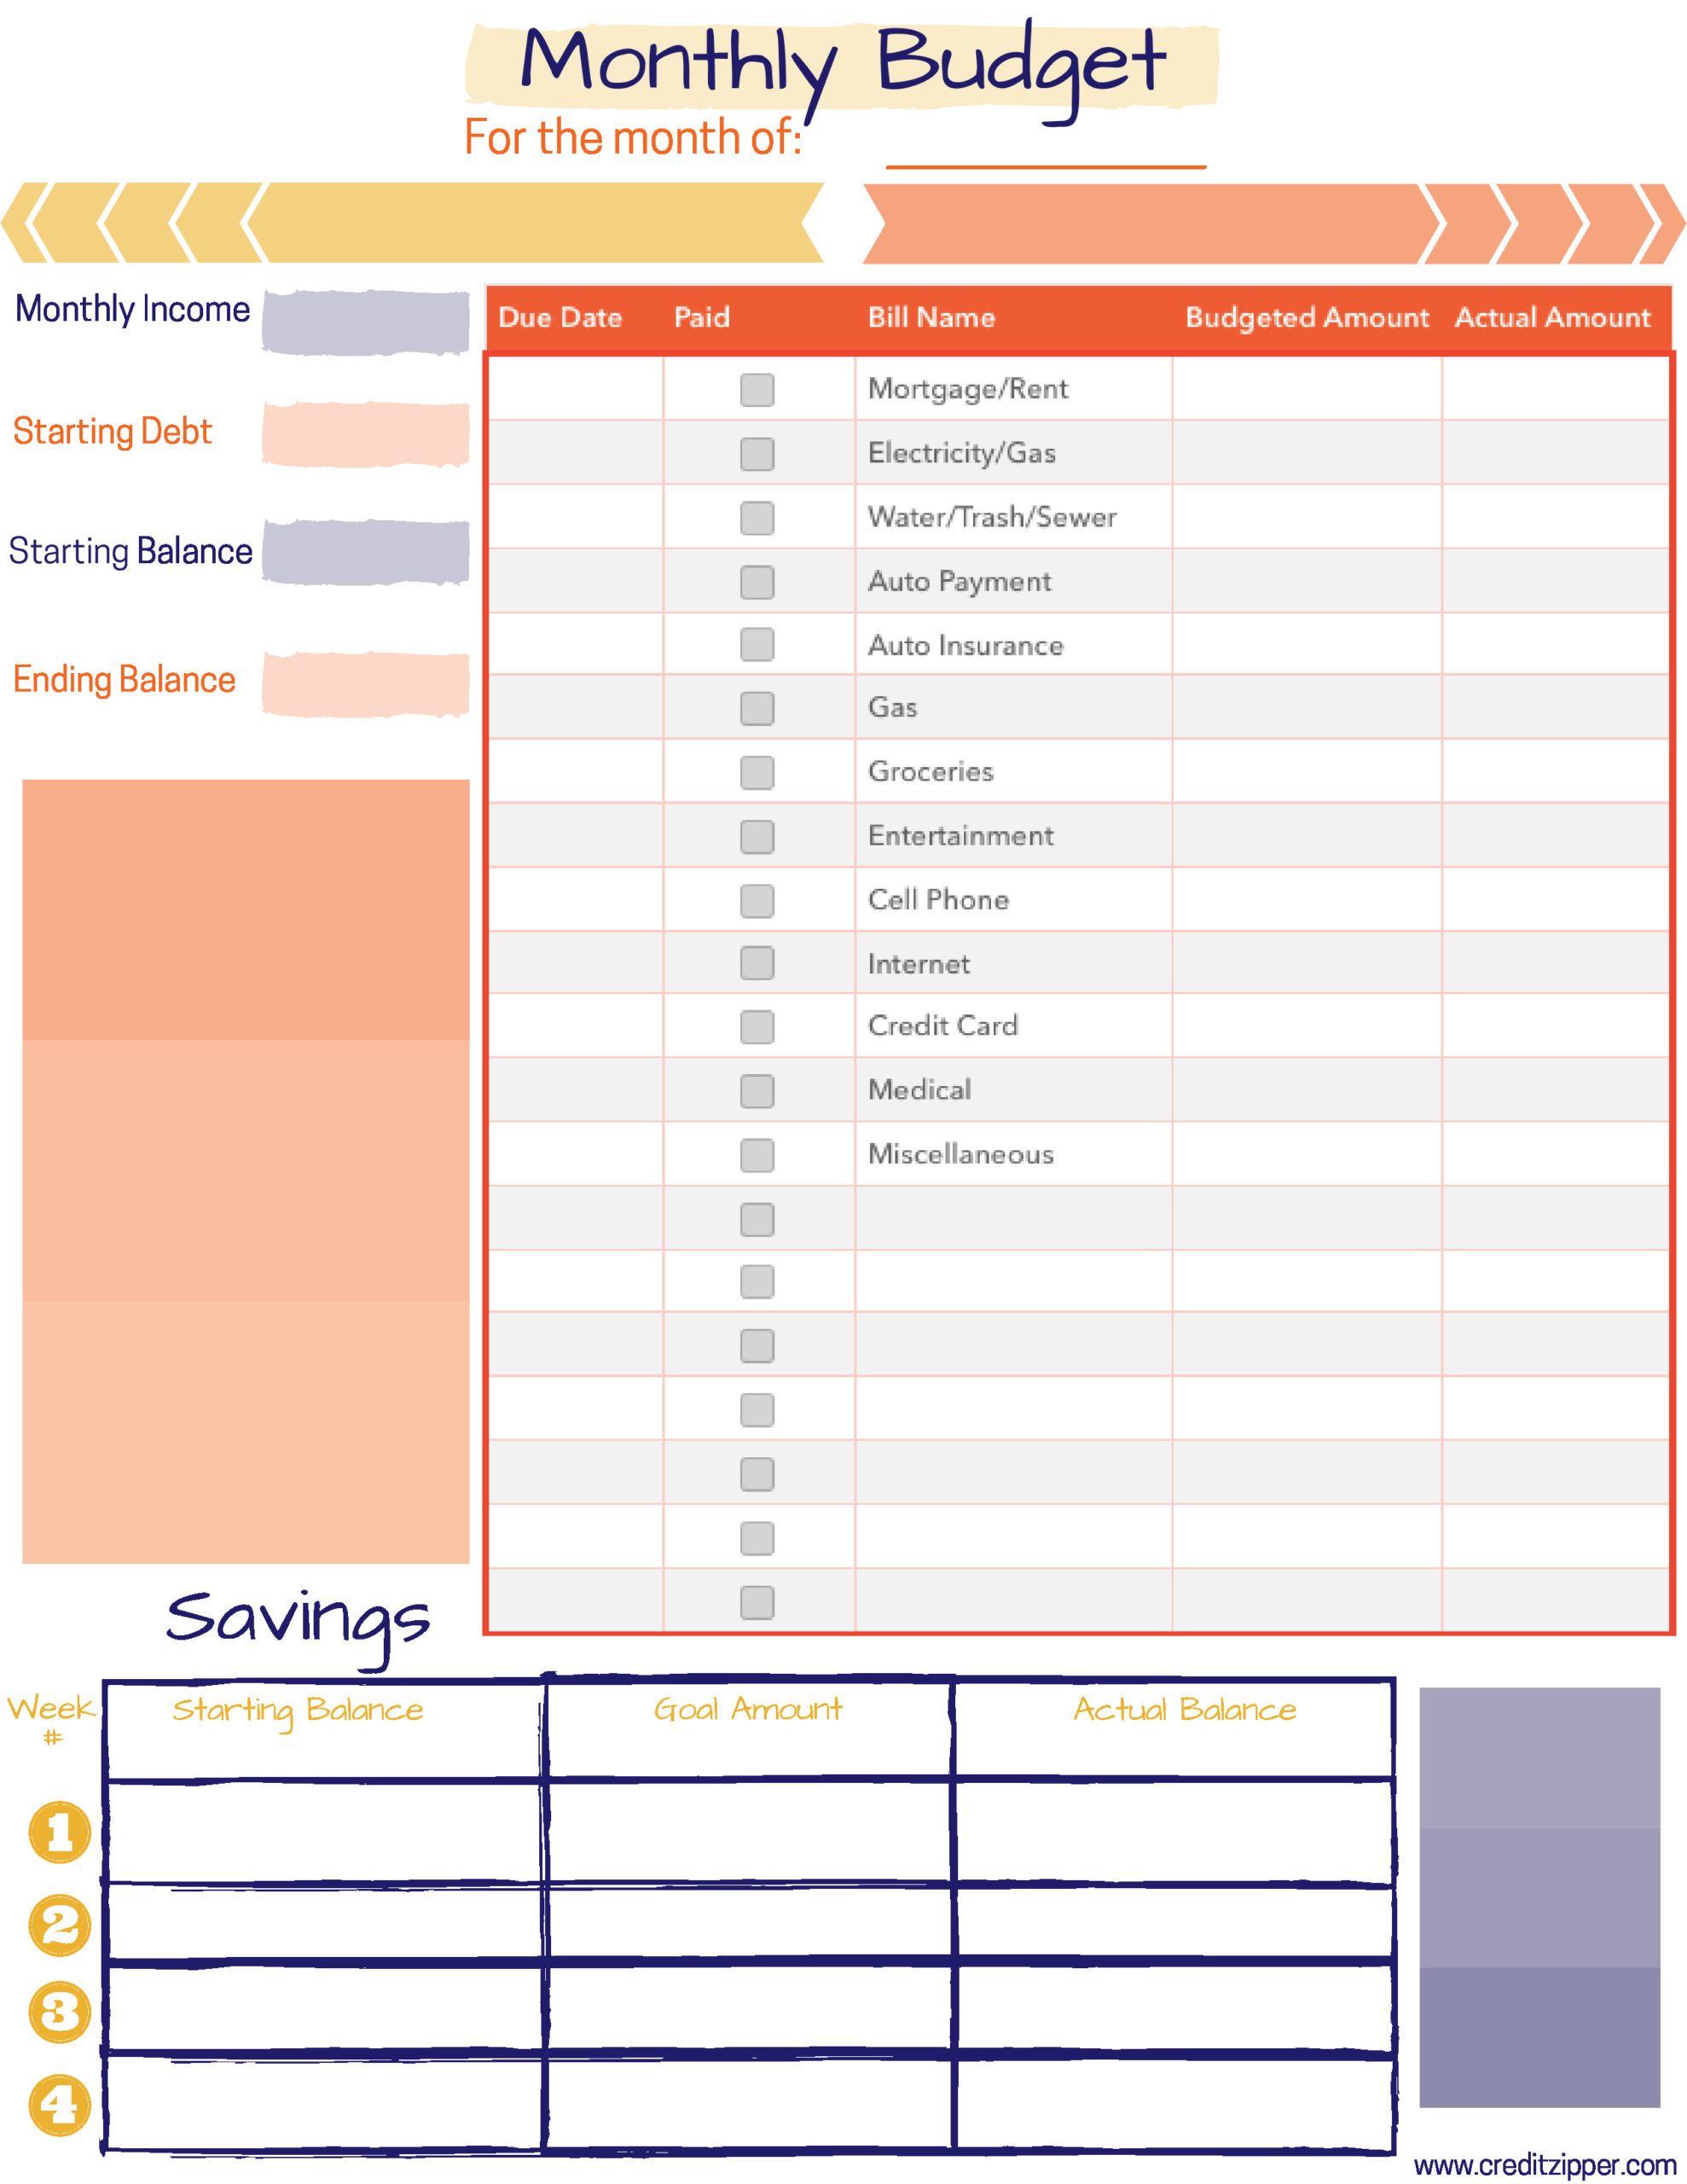 Free Monthly Budget Planner Printable | Credit Zipper inside Free Online Budget Planner Template